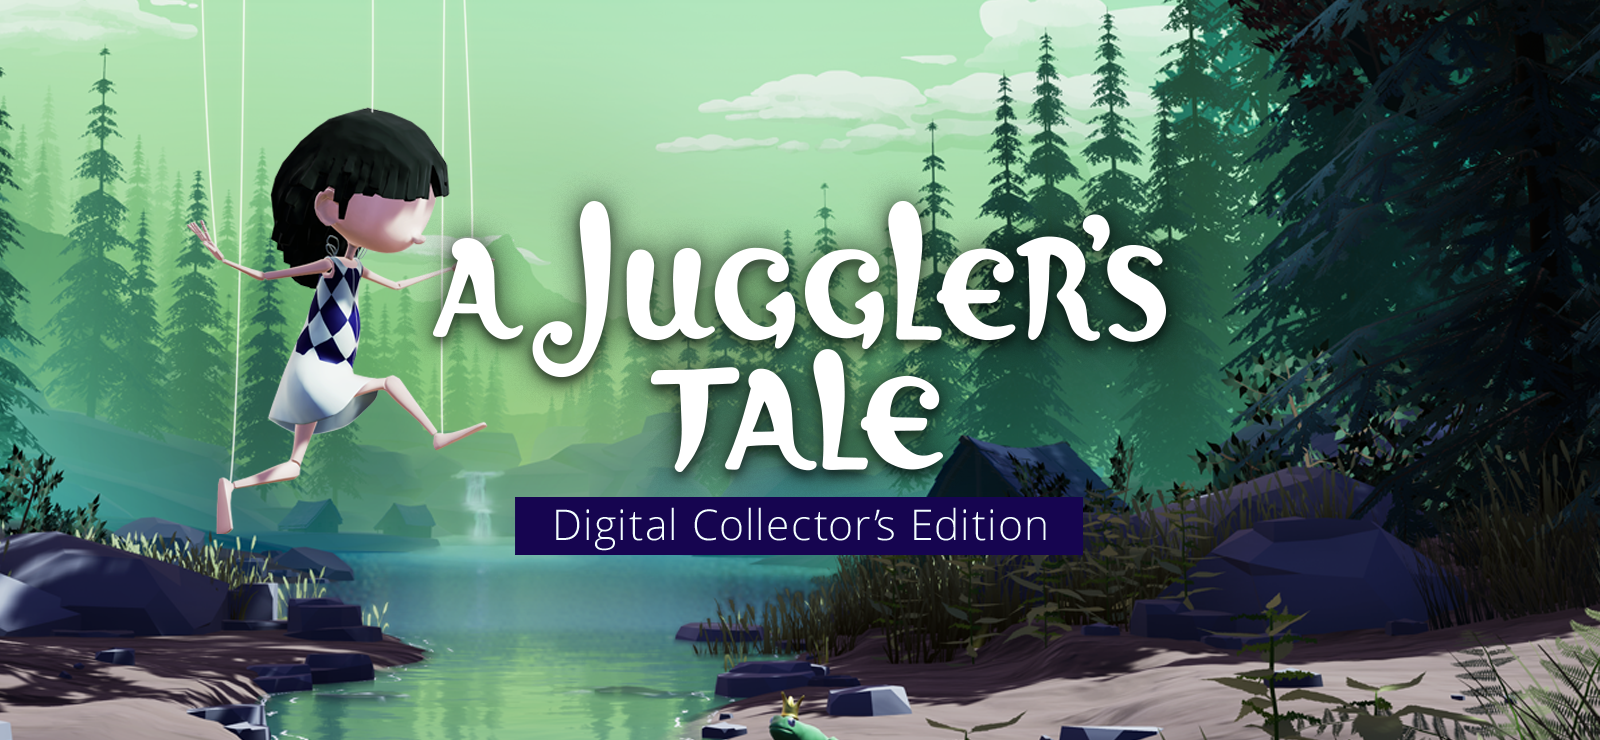 A Juggler's Tale Collector's Edition